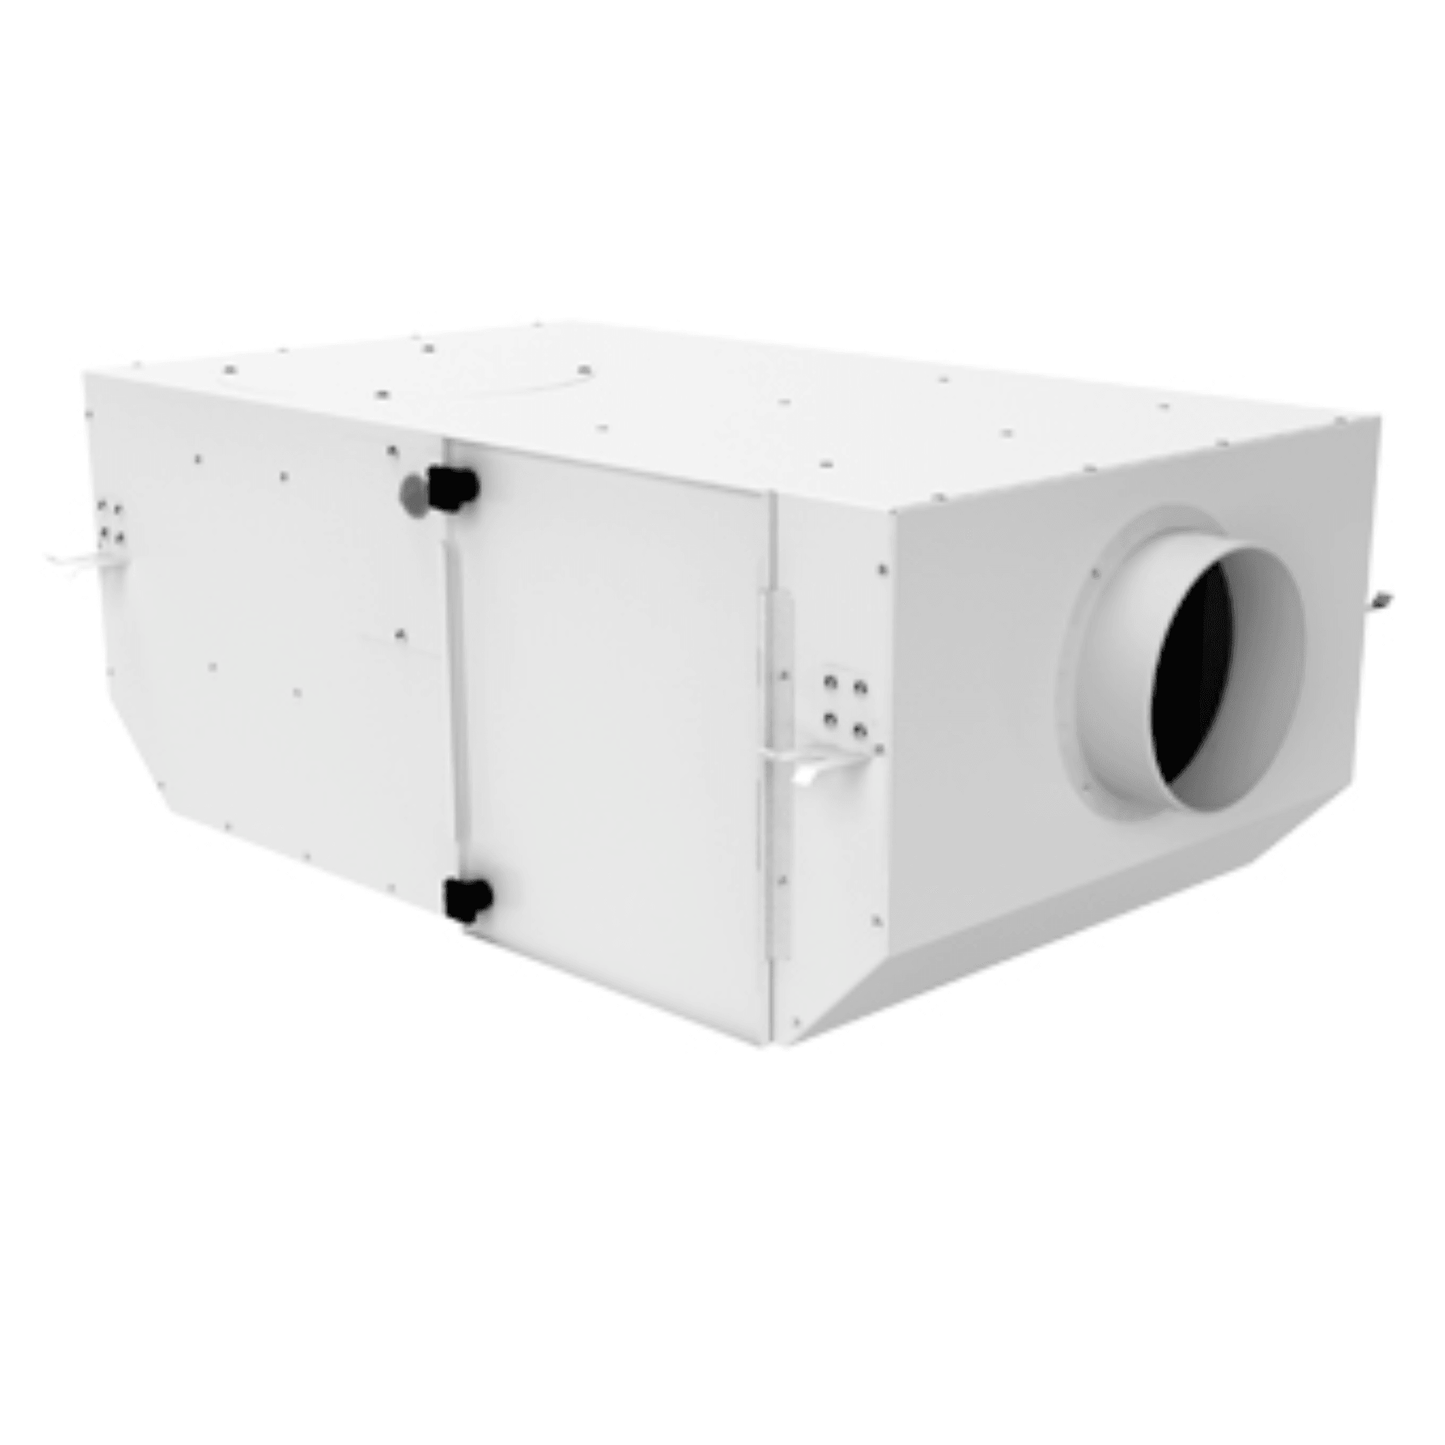 Vents FB K2 Series Inline Filter Box with Single Filter